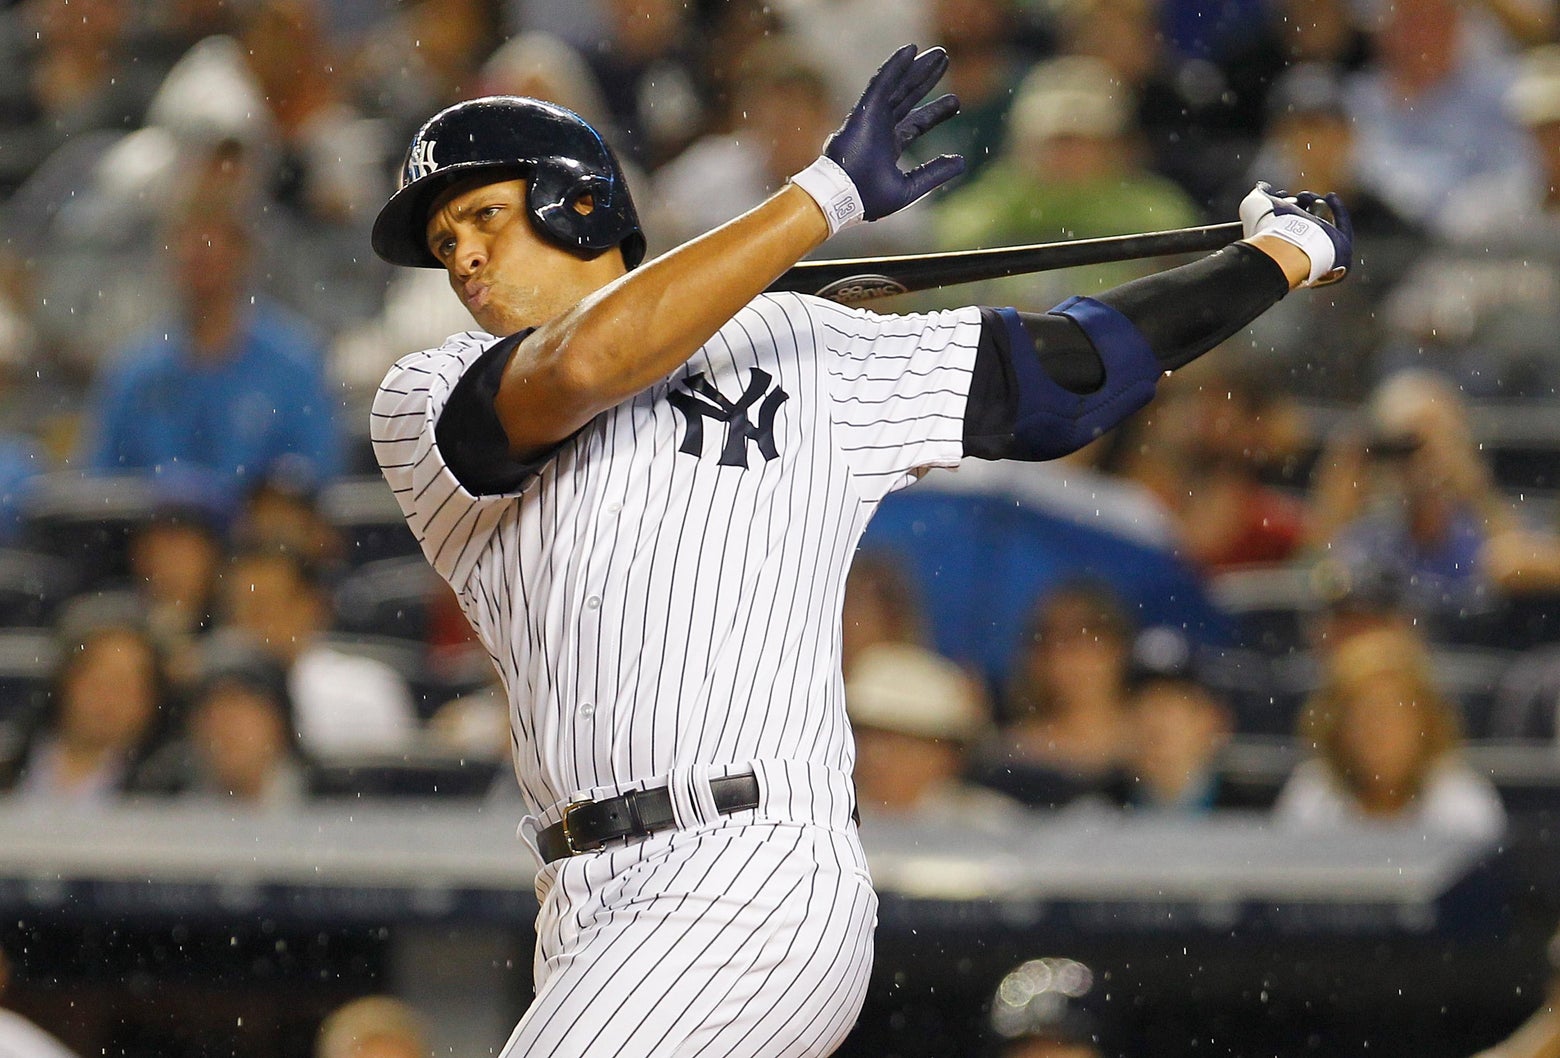 After Braun's Suspension, Is A-Rod Next At Bat?